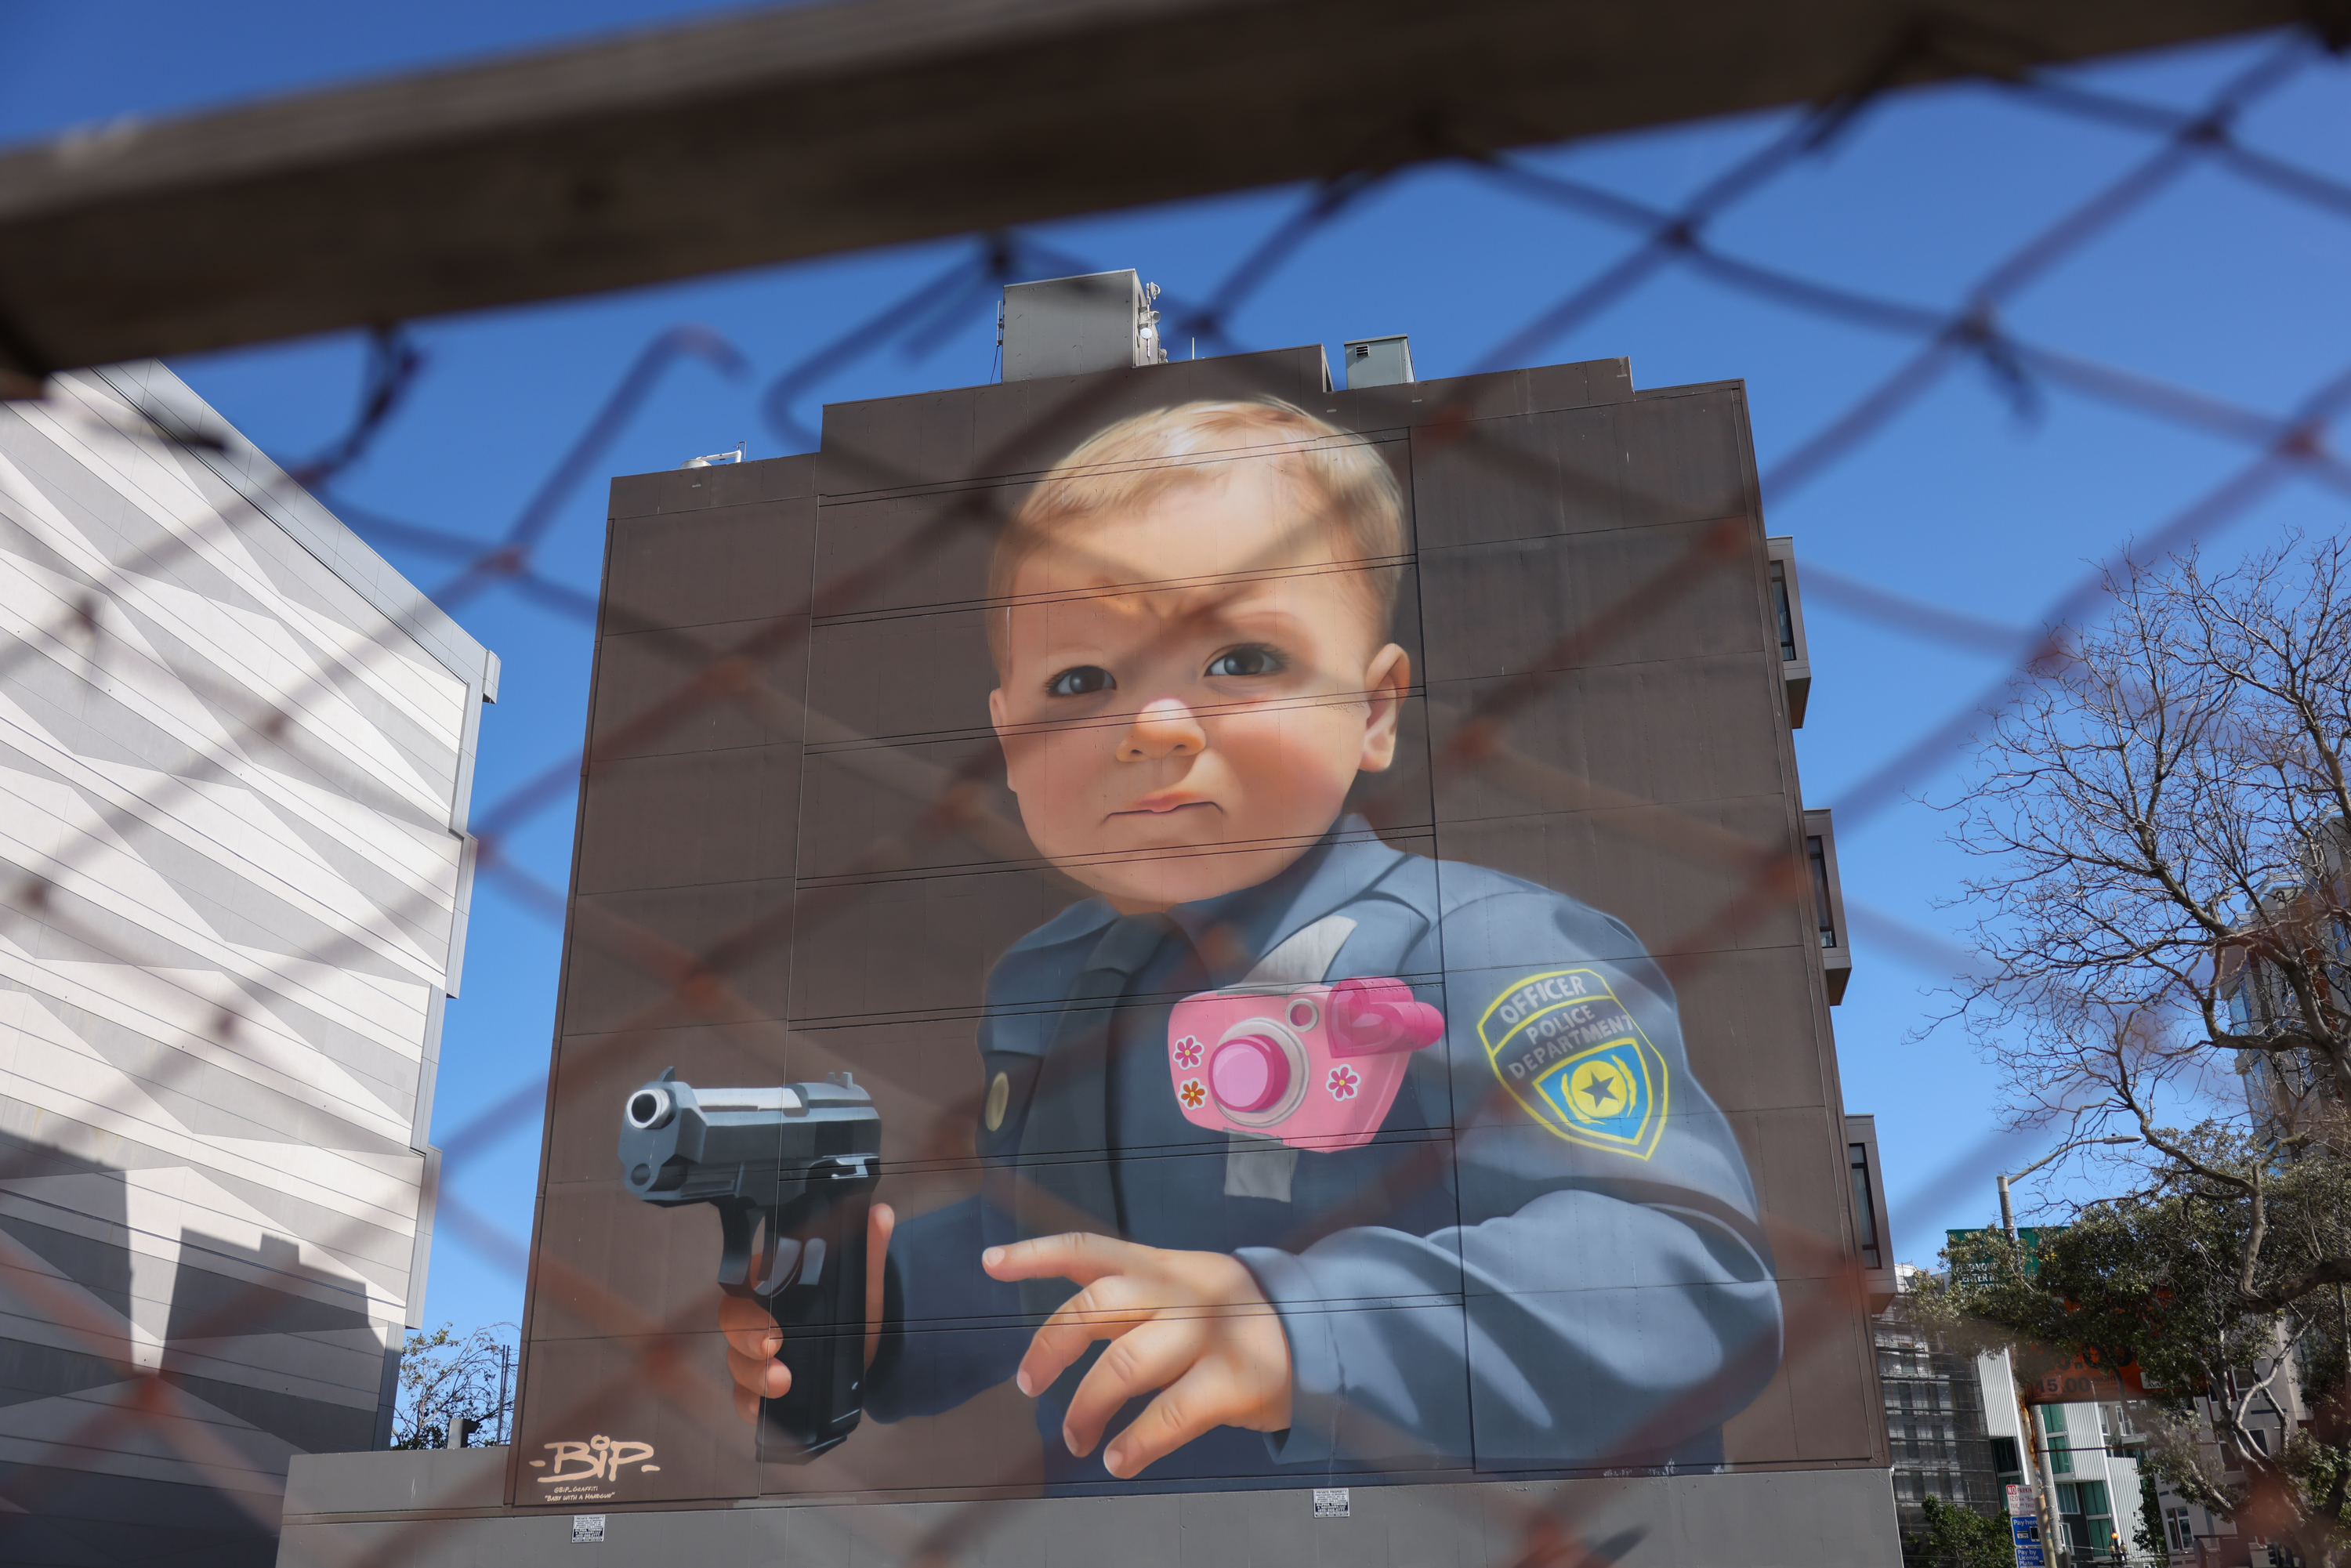 Large painting of a baby cop on the side of a building